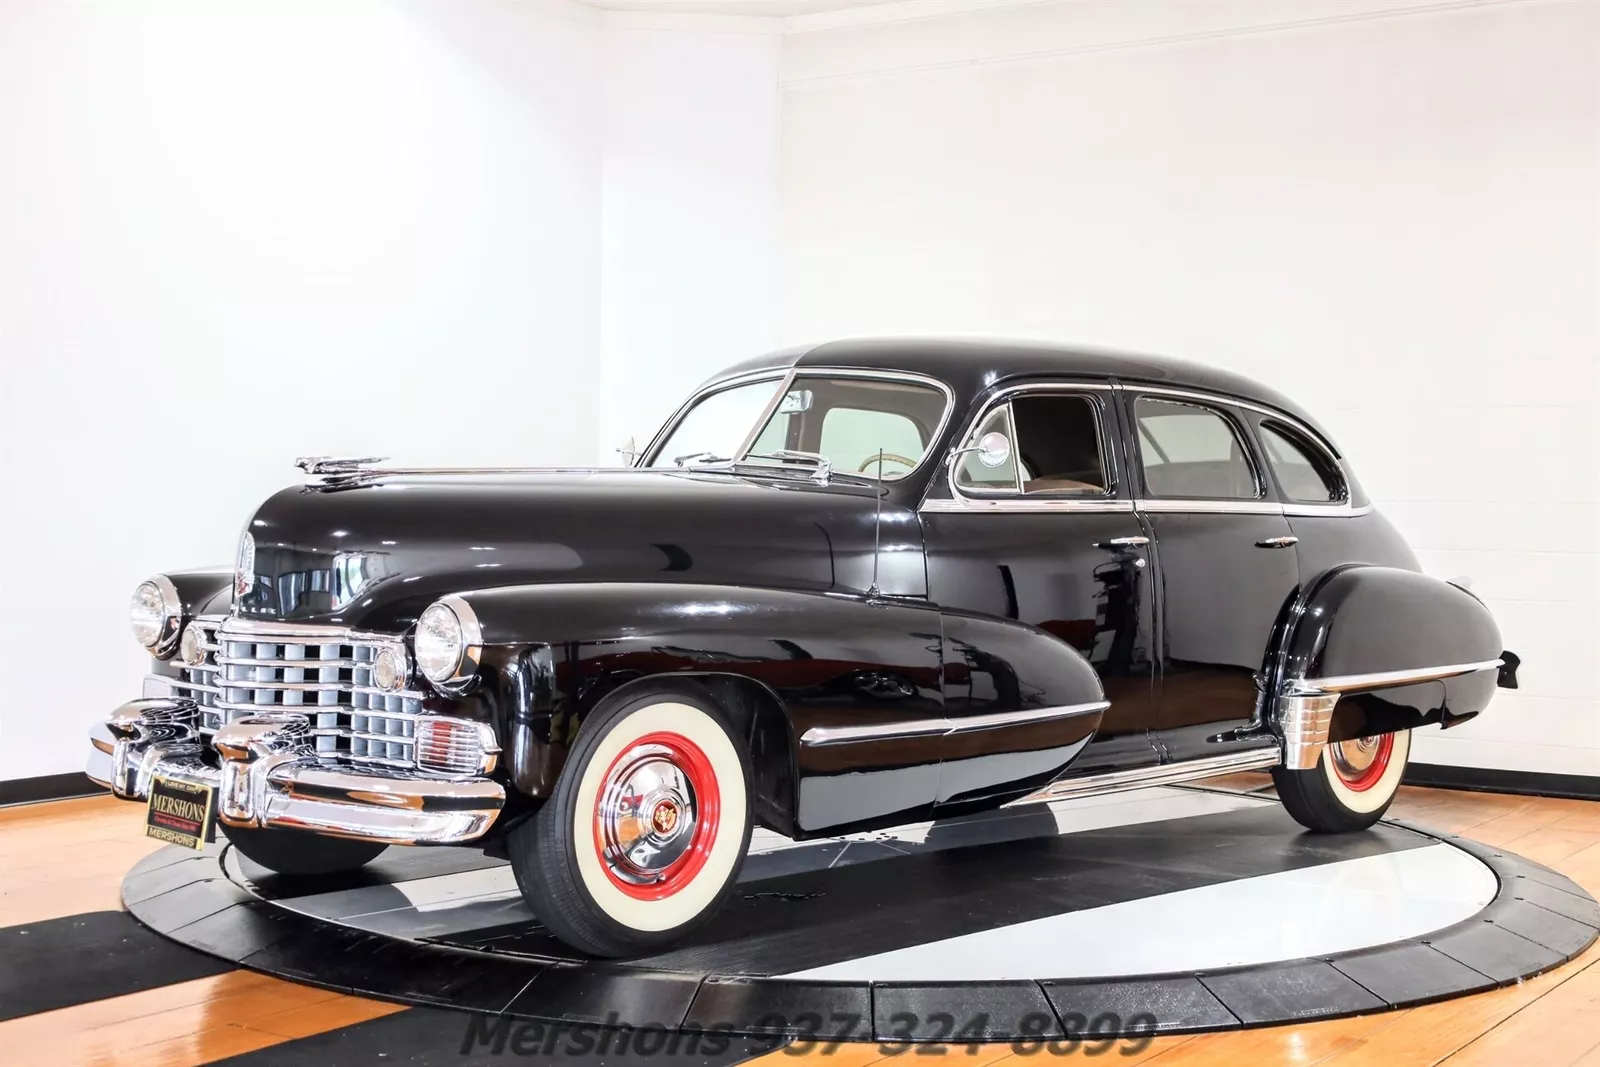 1942 Cadillac Deluxe Touring Sedan for sale